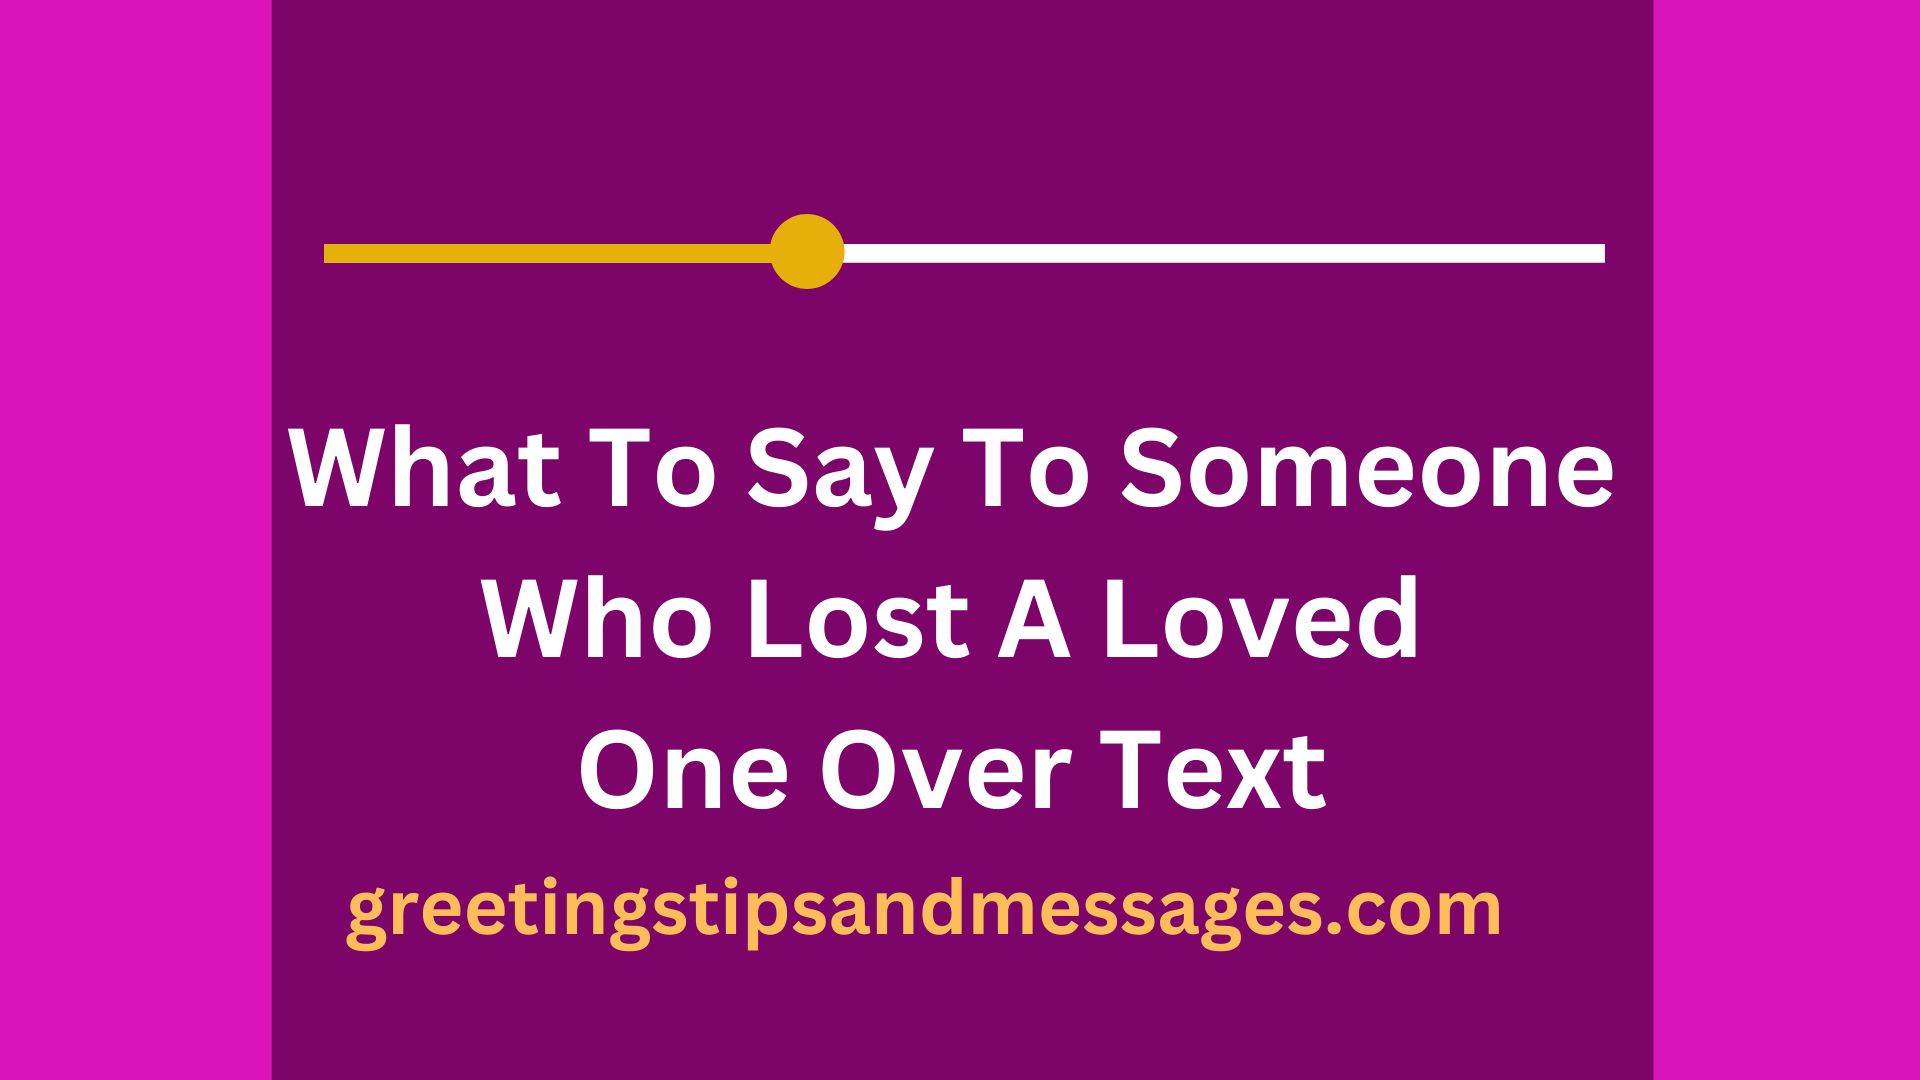 What To Say To Someone Who Lost A Loved One Over Text